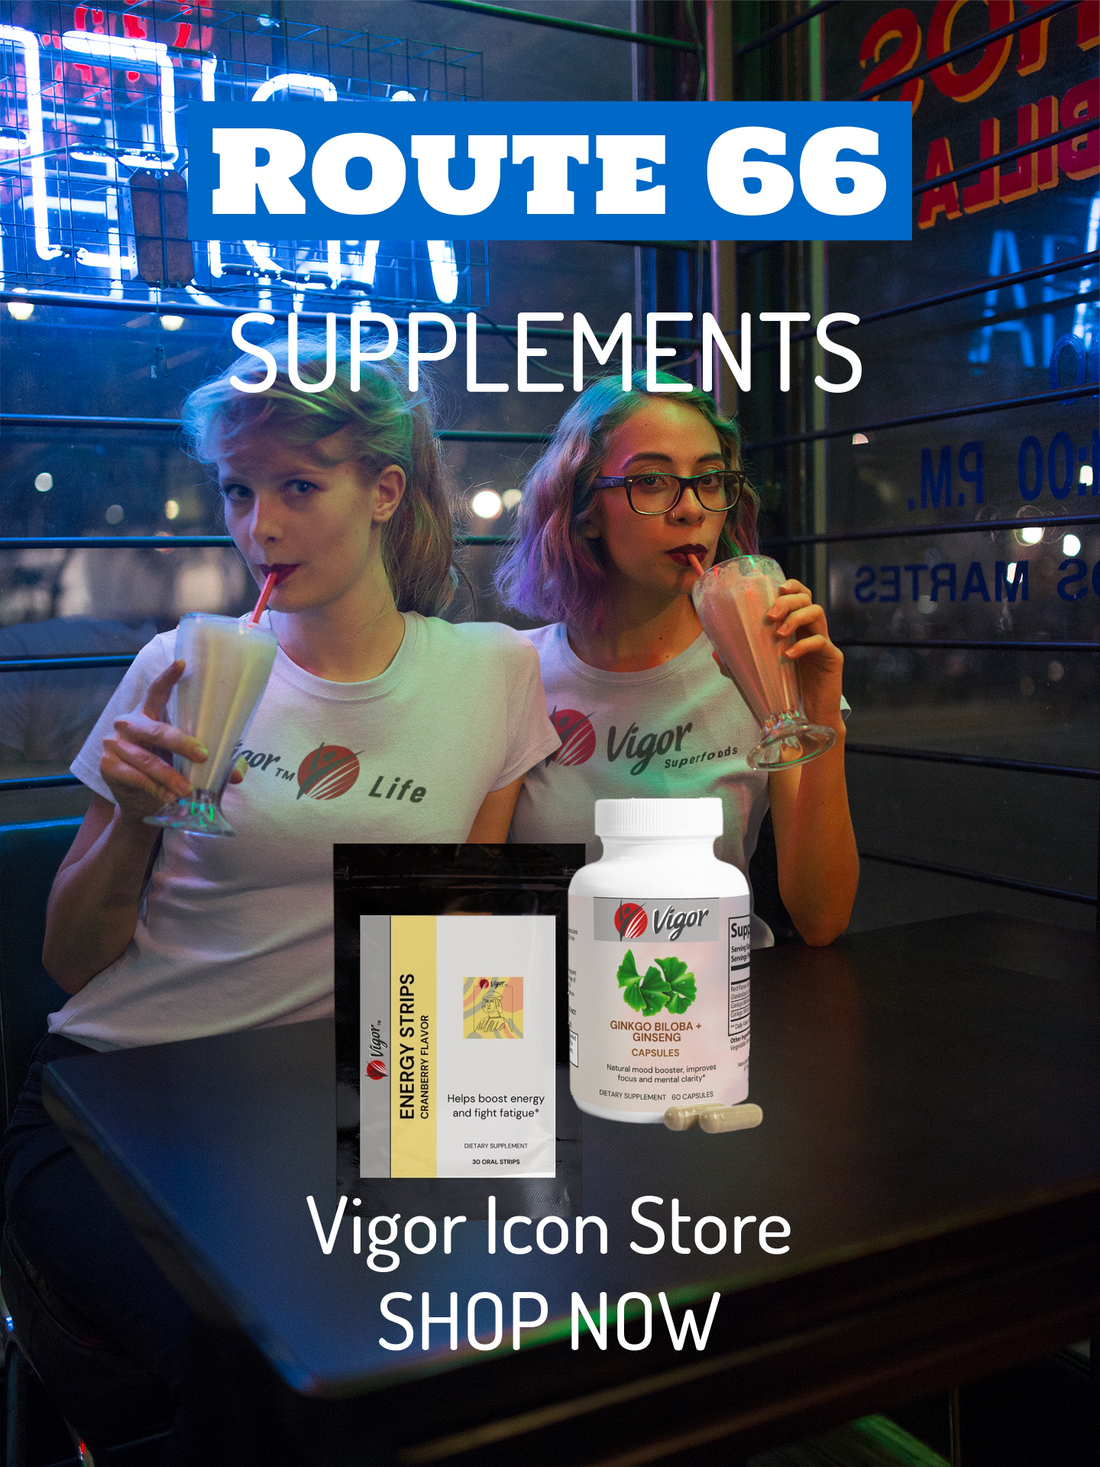 Vigor Route 66 supplements poster featuring two friends in a highway restaurant drinking smoothies while announcing energy and cognitive support supplements